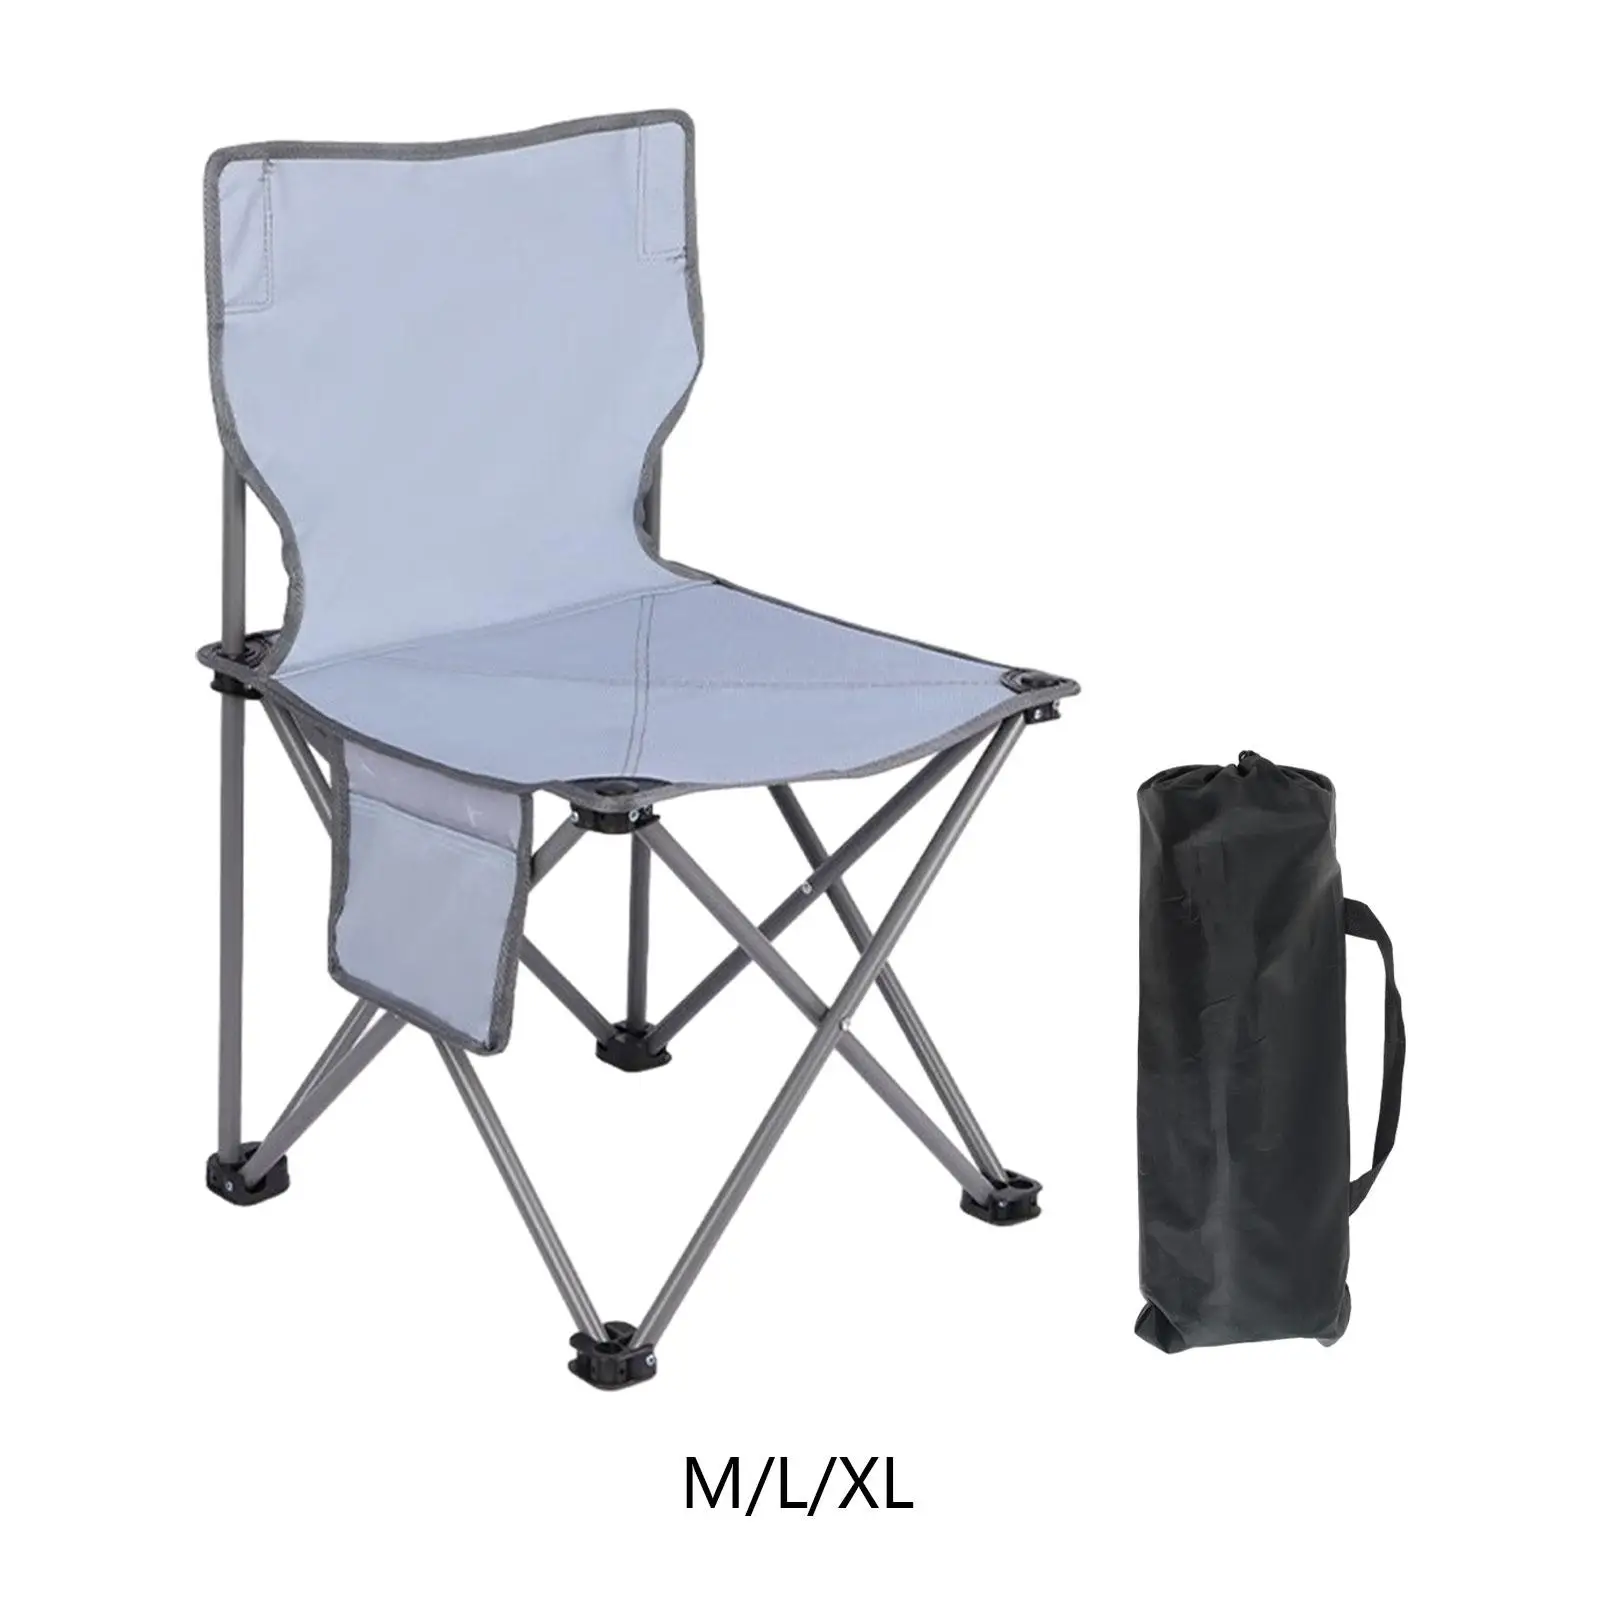 Portable Camping Chair Folding Chair for Outside for Beach Garden Picnic